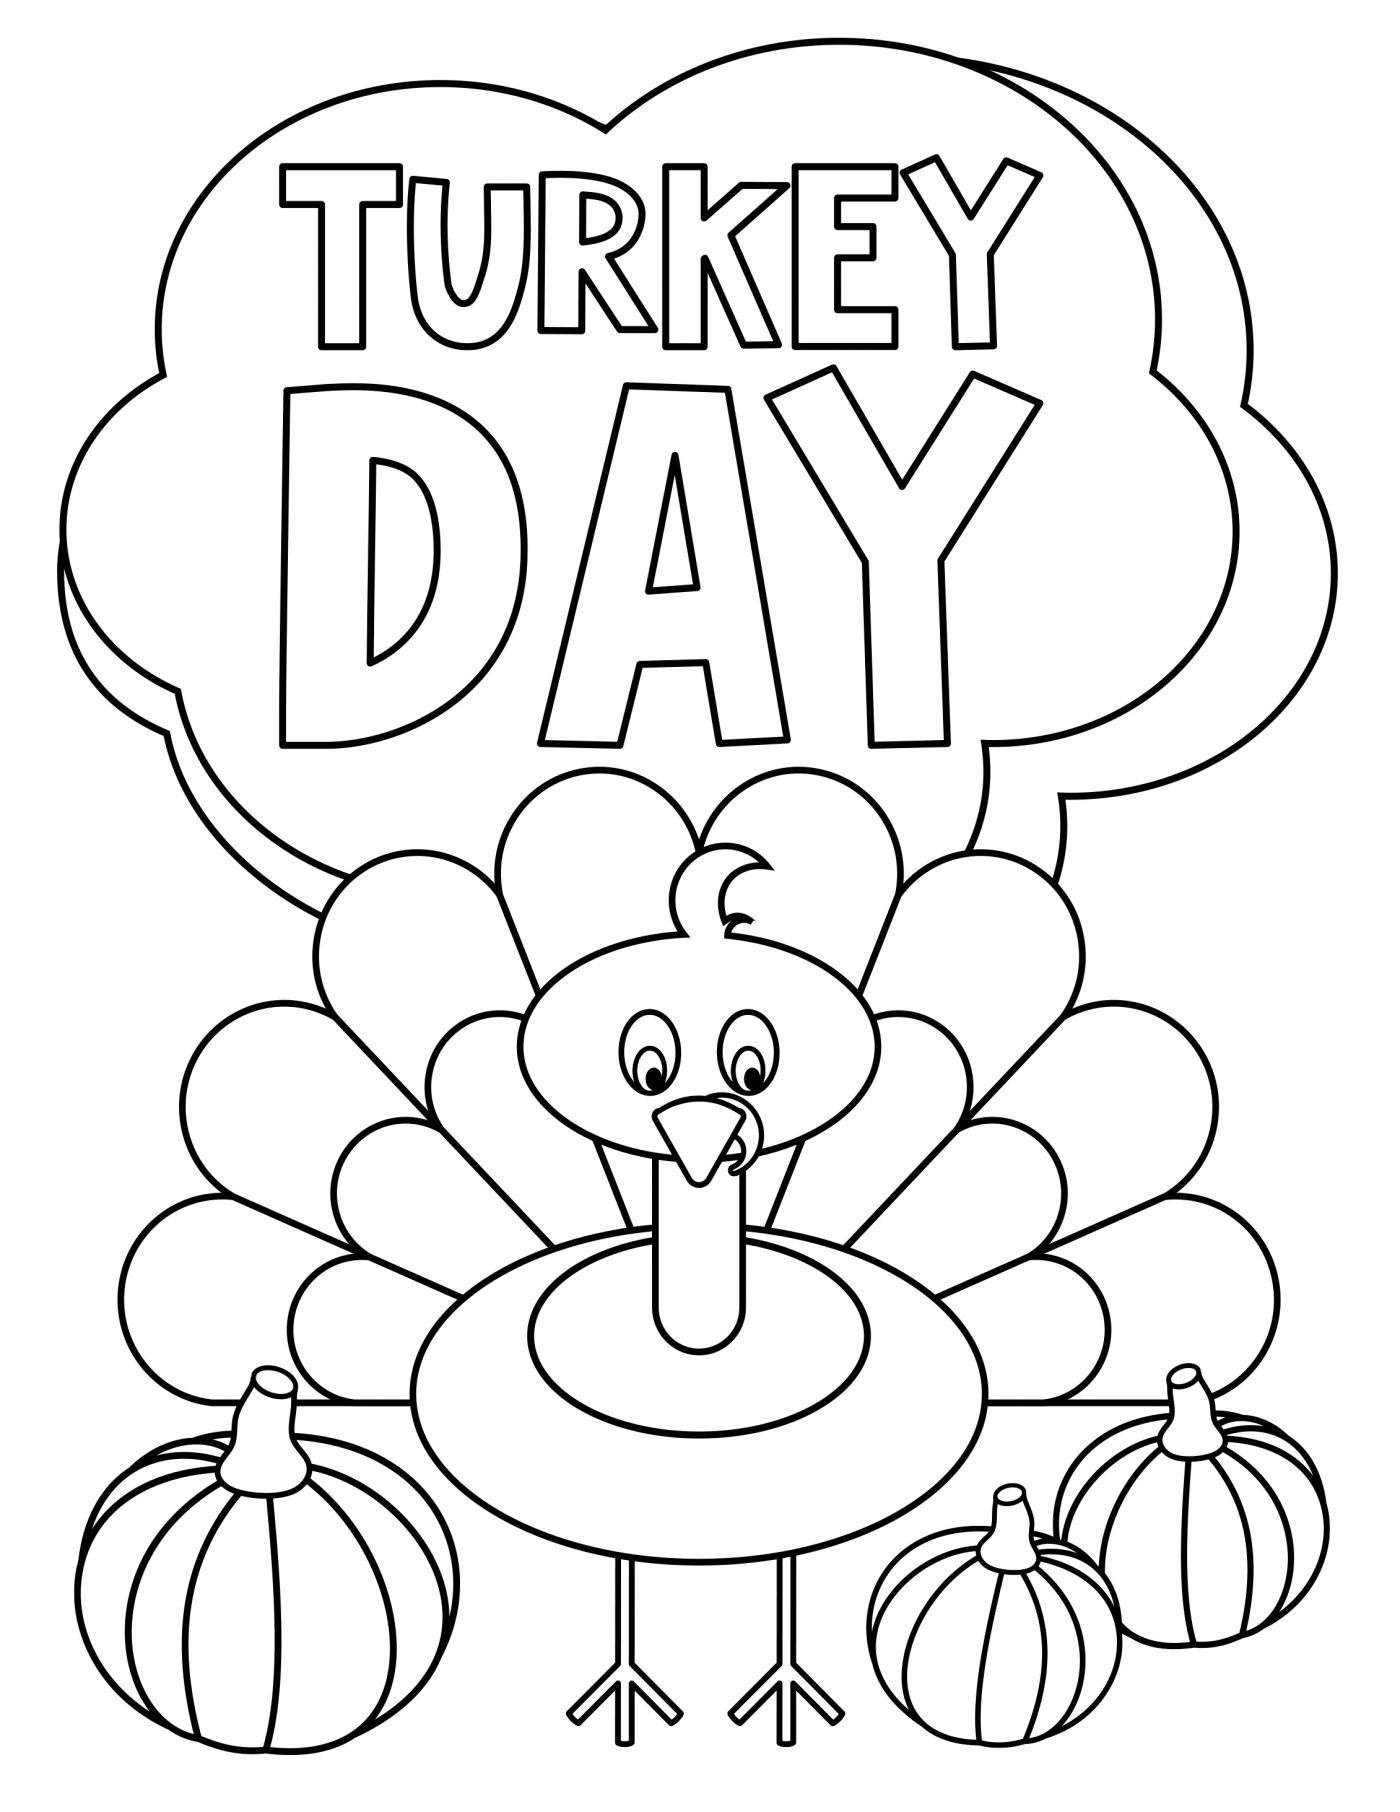 Thanksgiving Turkey Day Coloring Page